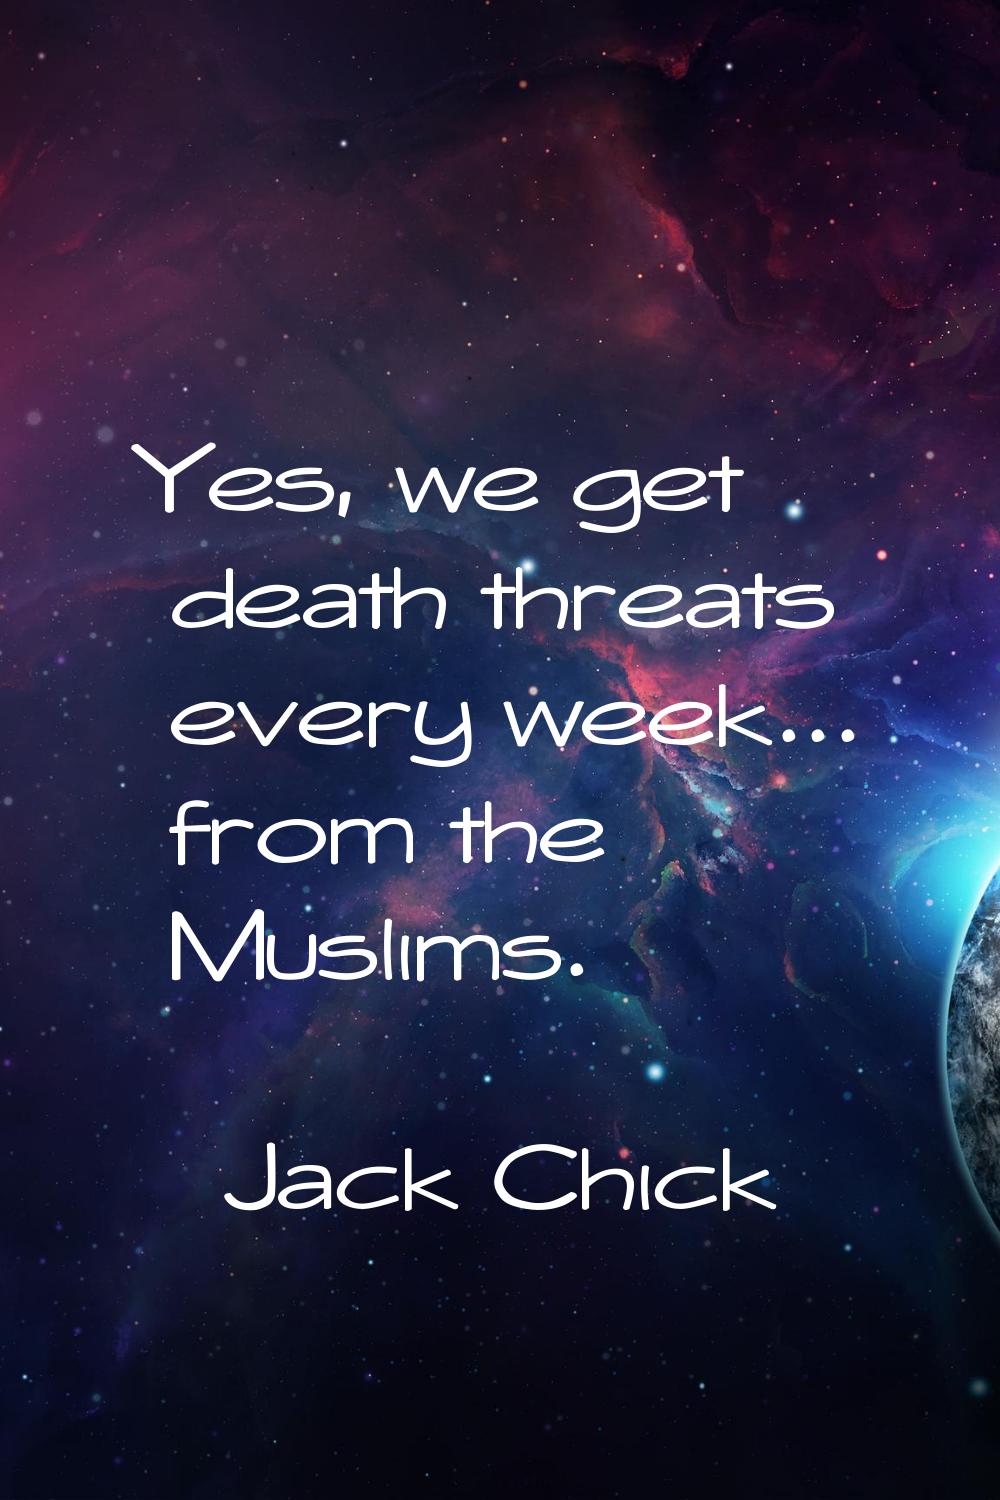 Yes, we get death threats every week... from the Muslims.